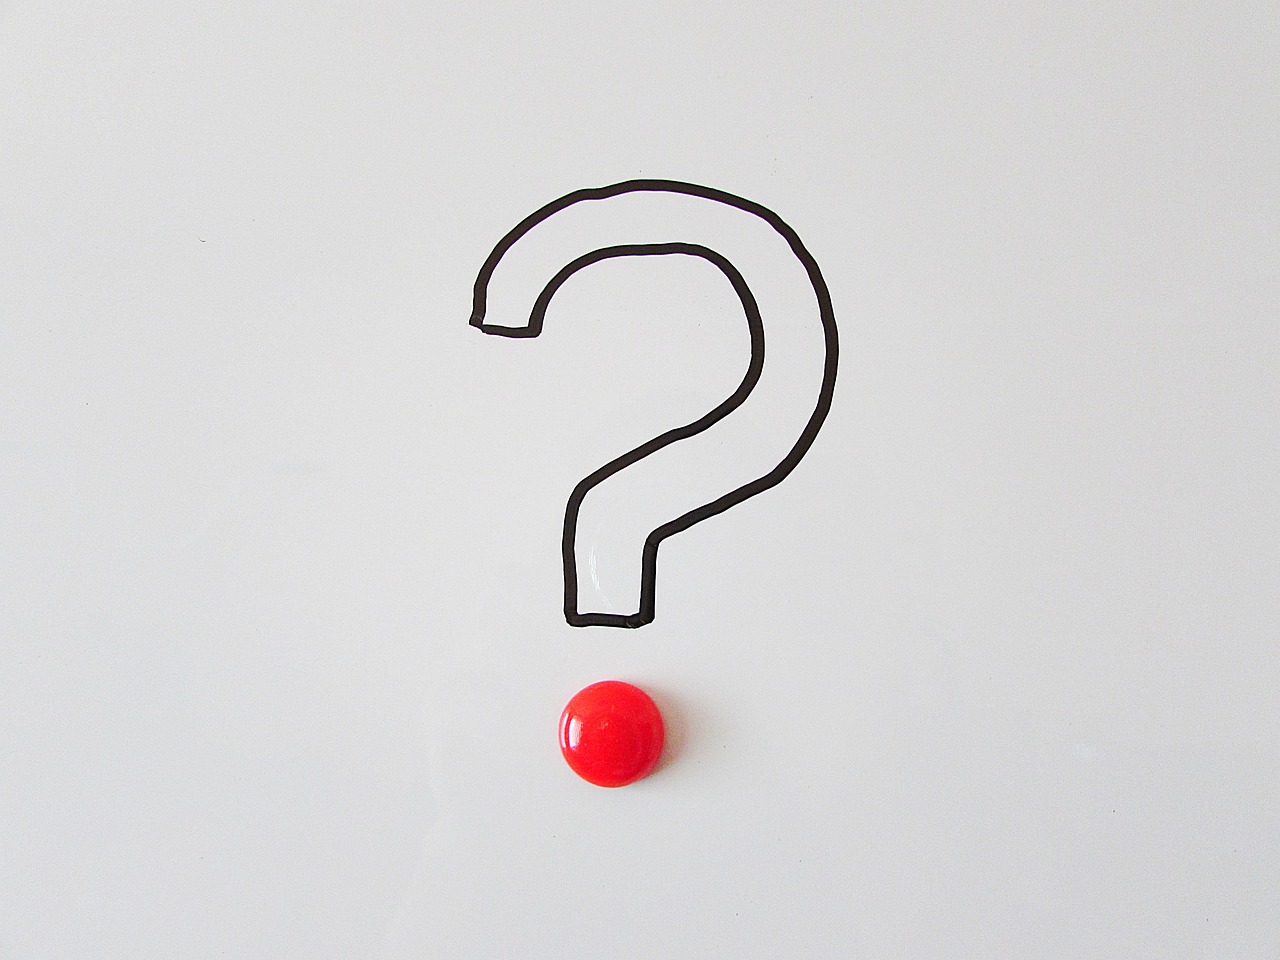 a piece of paper with a question mark drawn on it, flickr, minimalism, red clown nose, q hayashida, vinyl, mysterious figure